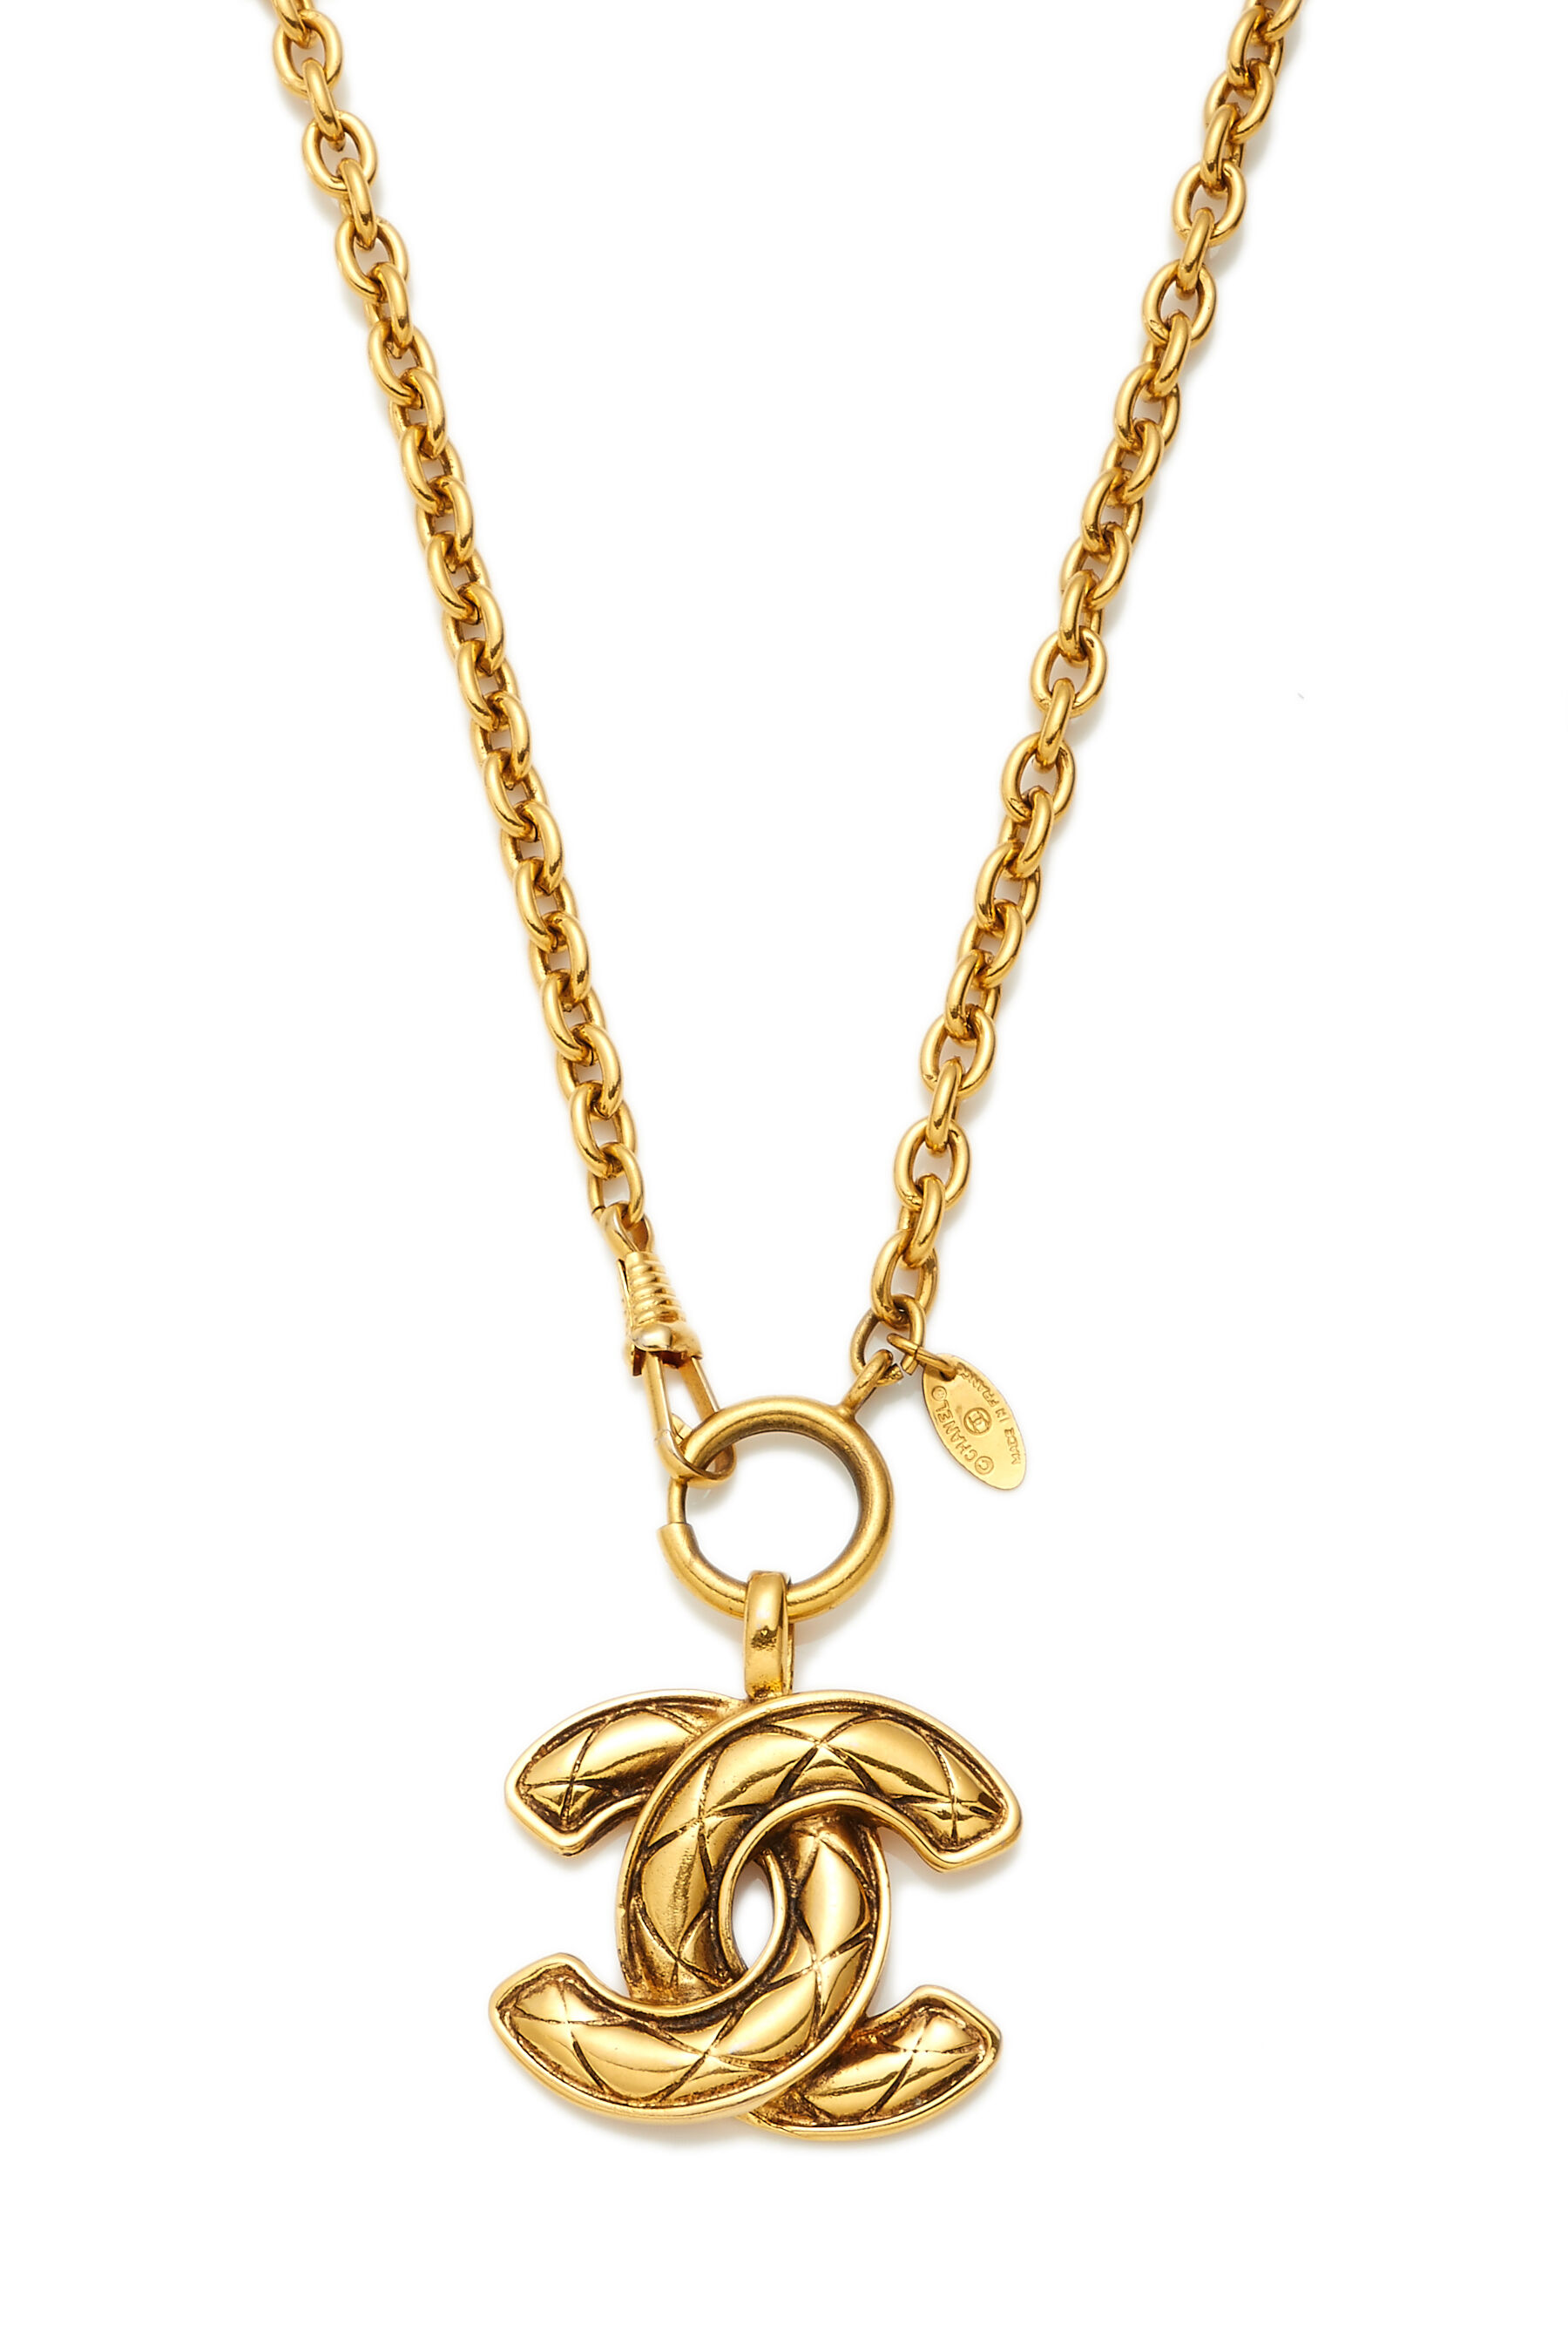 cheap chanel necklace